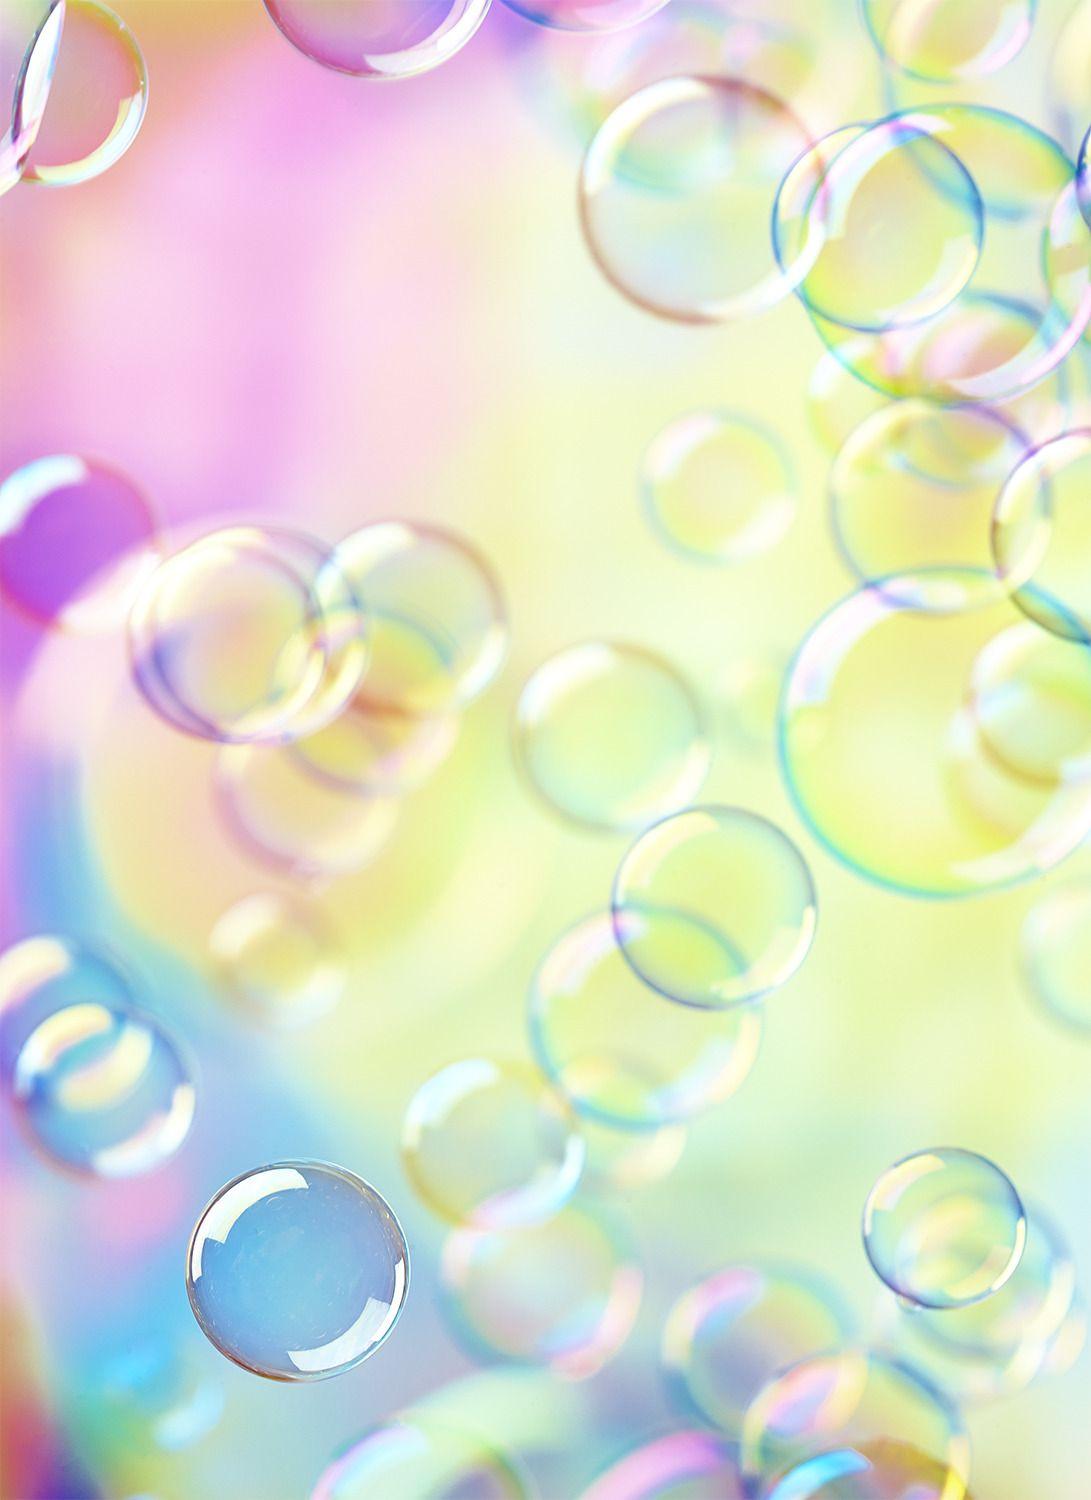 A Little Bit Of Everything. Bubbles, Pastel colors, Rainbow